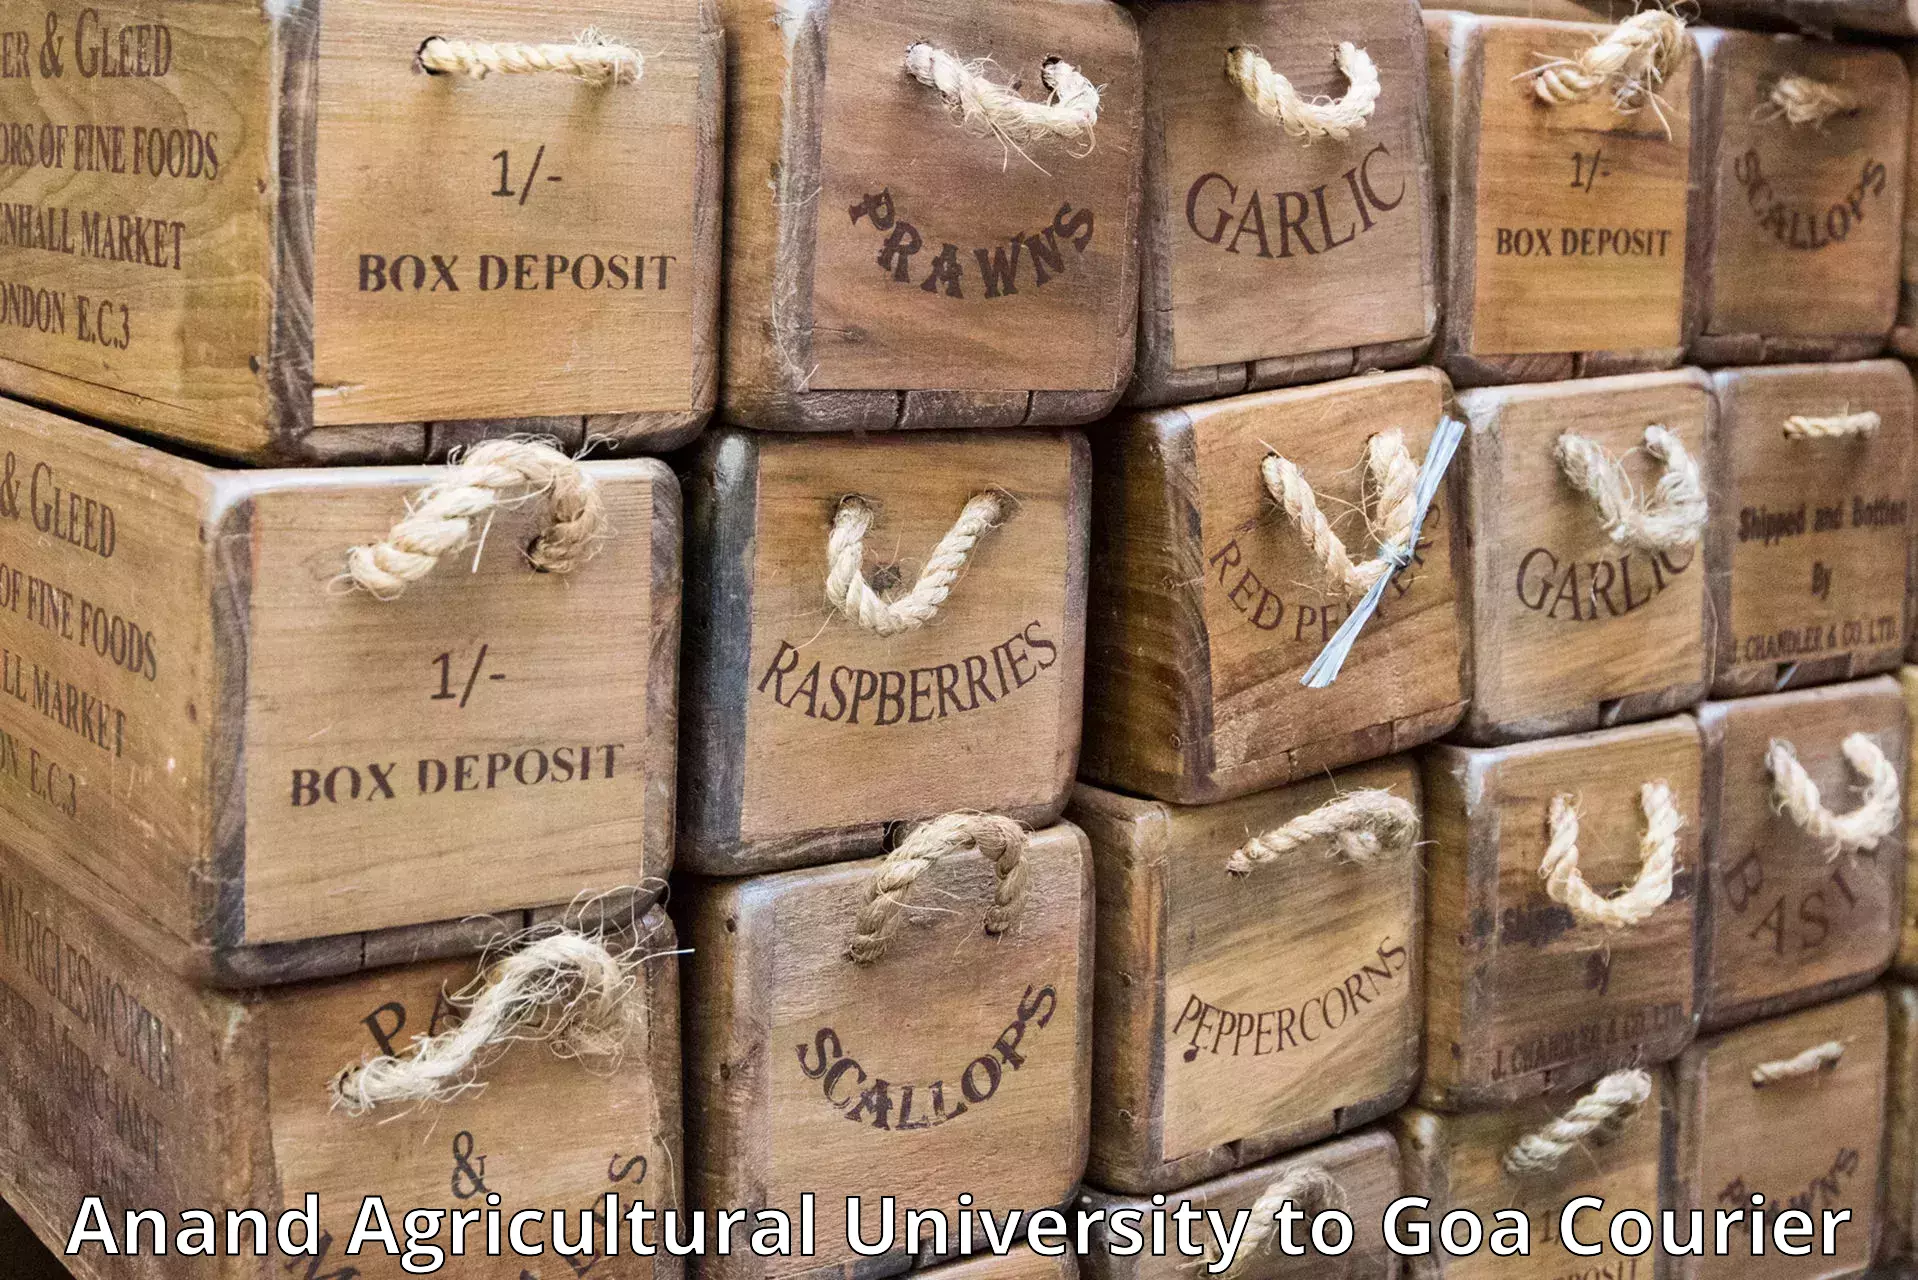 Secure package delivery Anand Agricultural University to Goa